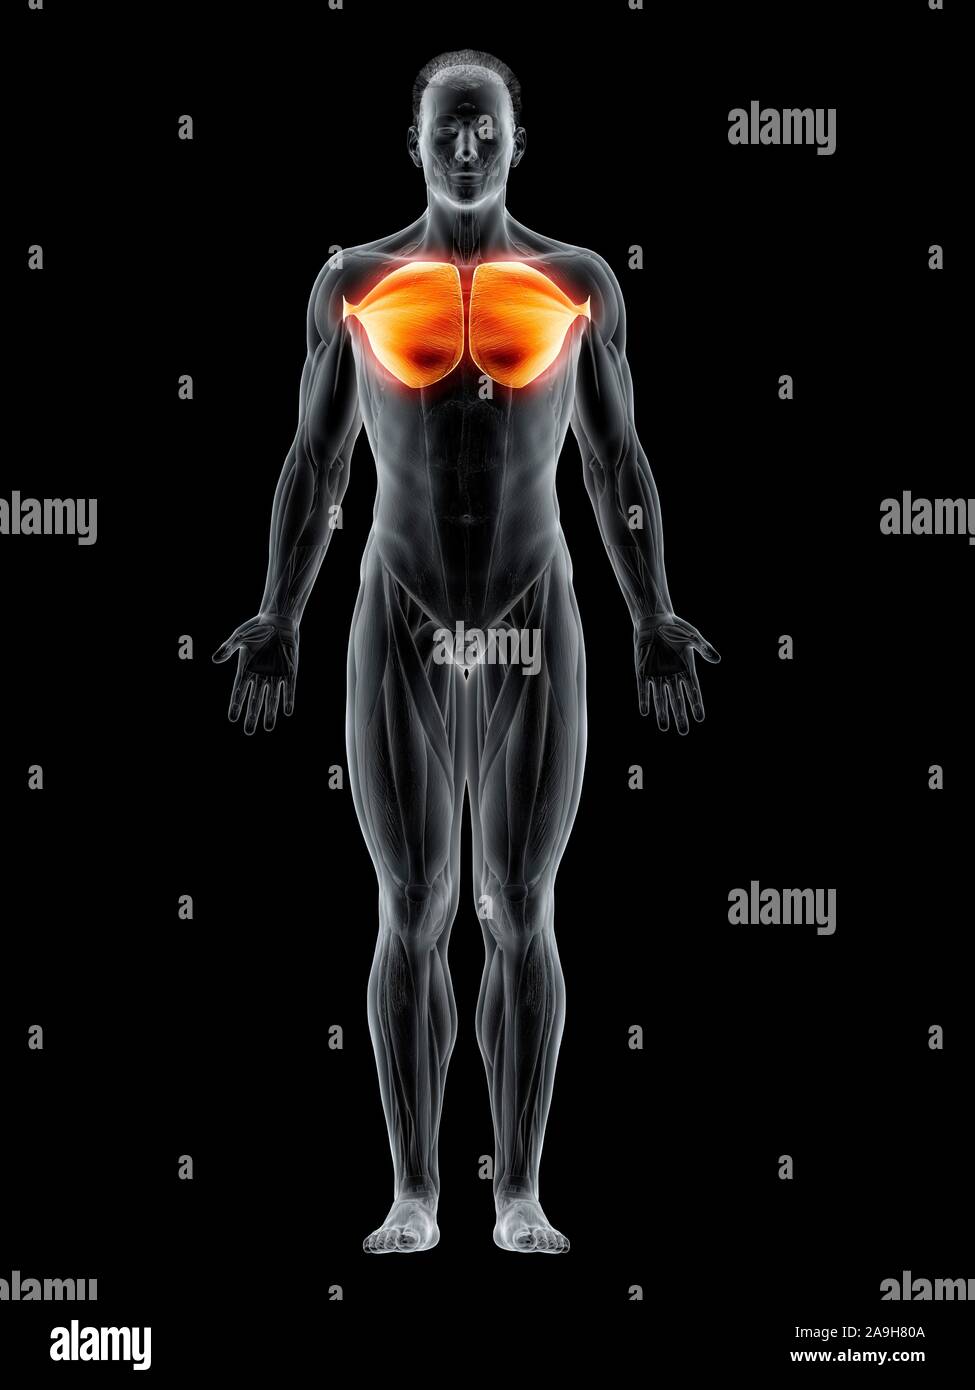 Anatomy of female chest and torso featuring major muscular groups and  glands Stock Photo - Alamy